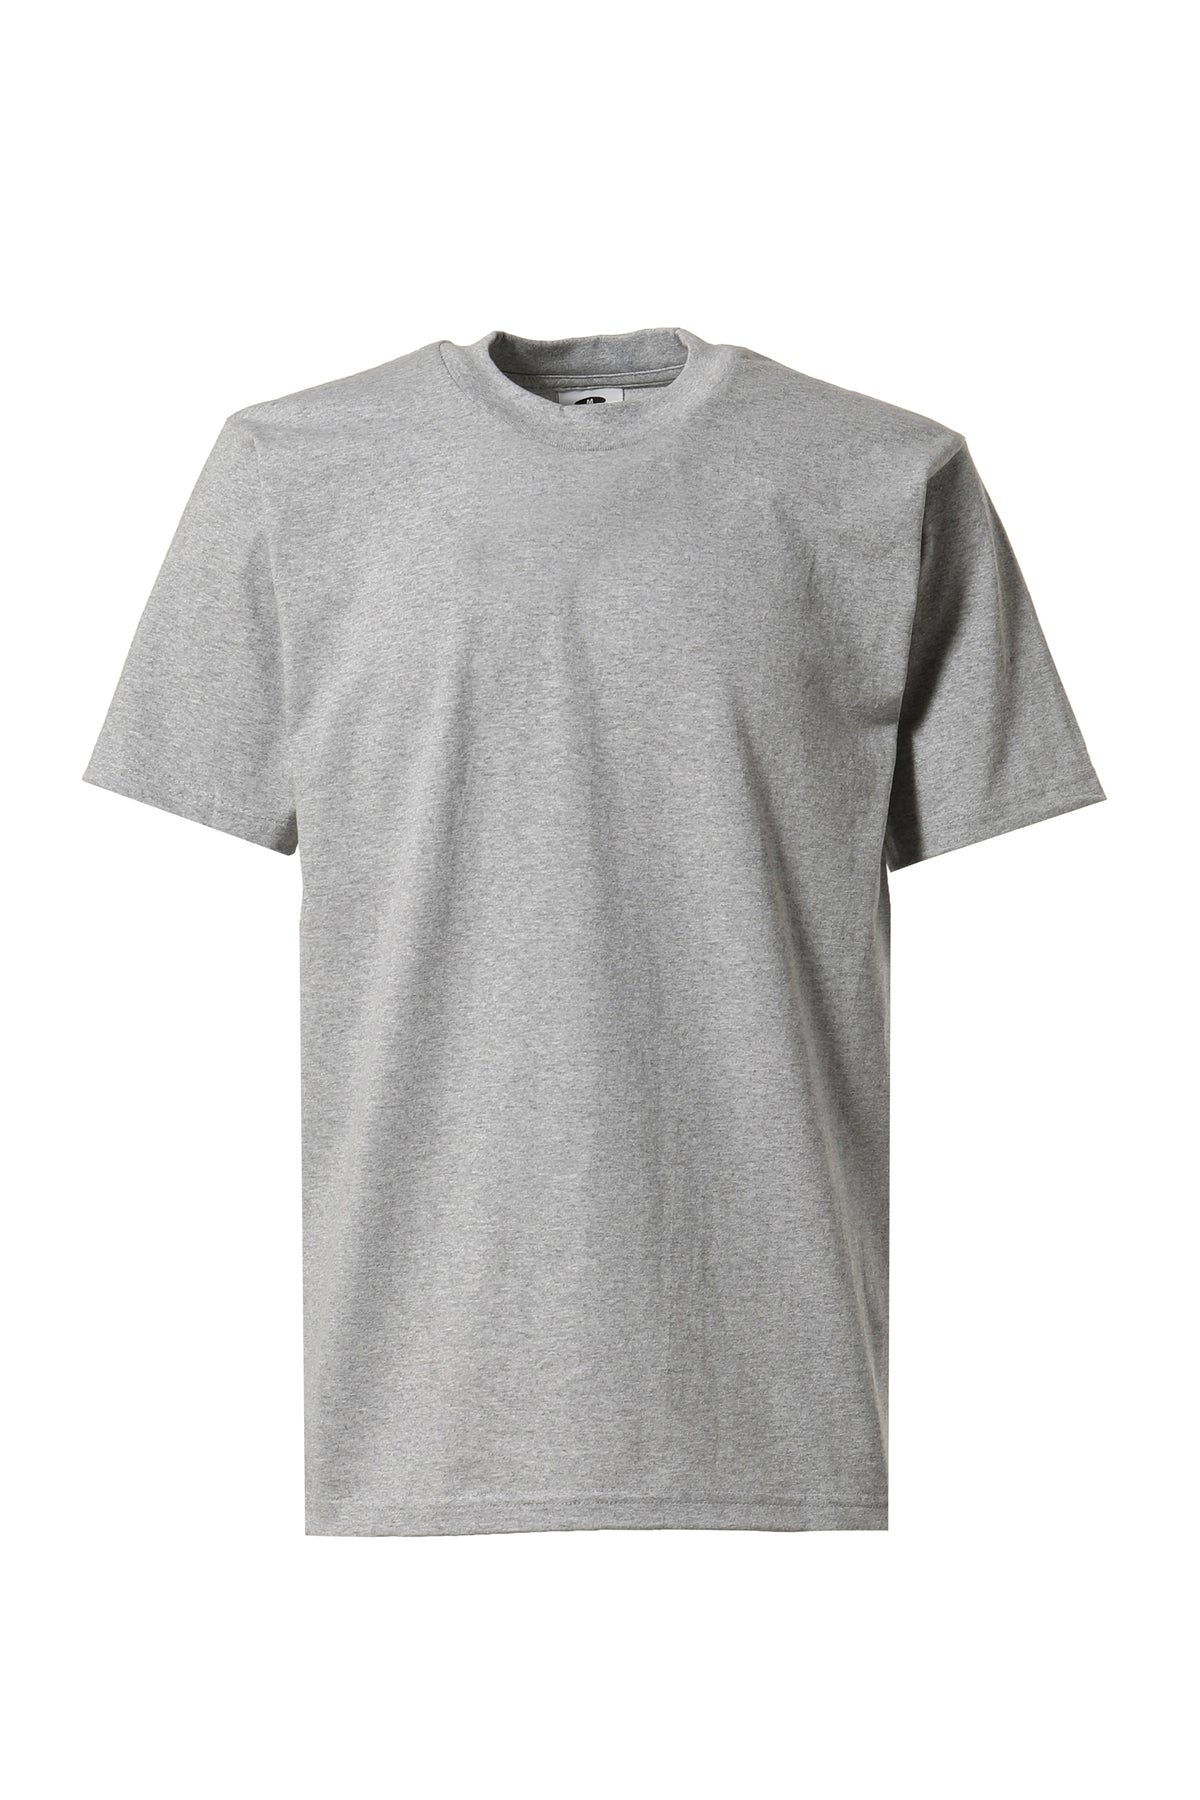 HEAVY WEIGHT CREWNECK T-SHIRT / GRY